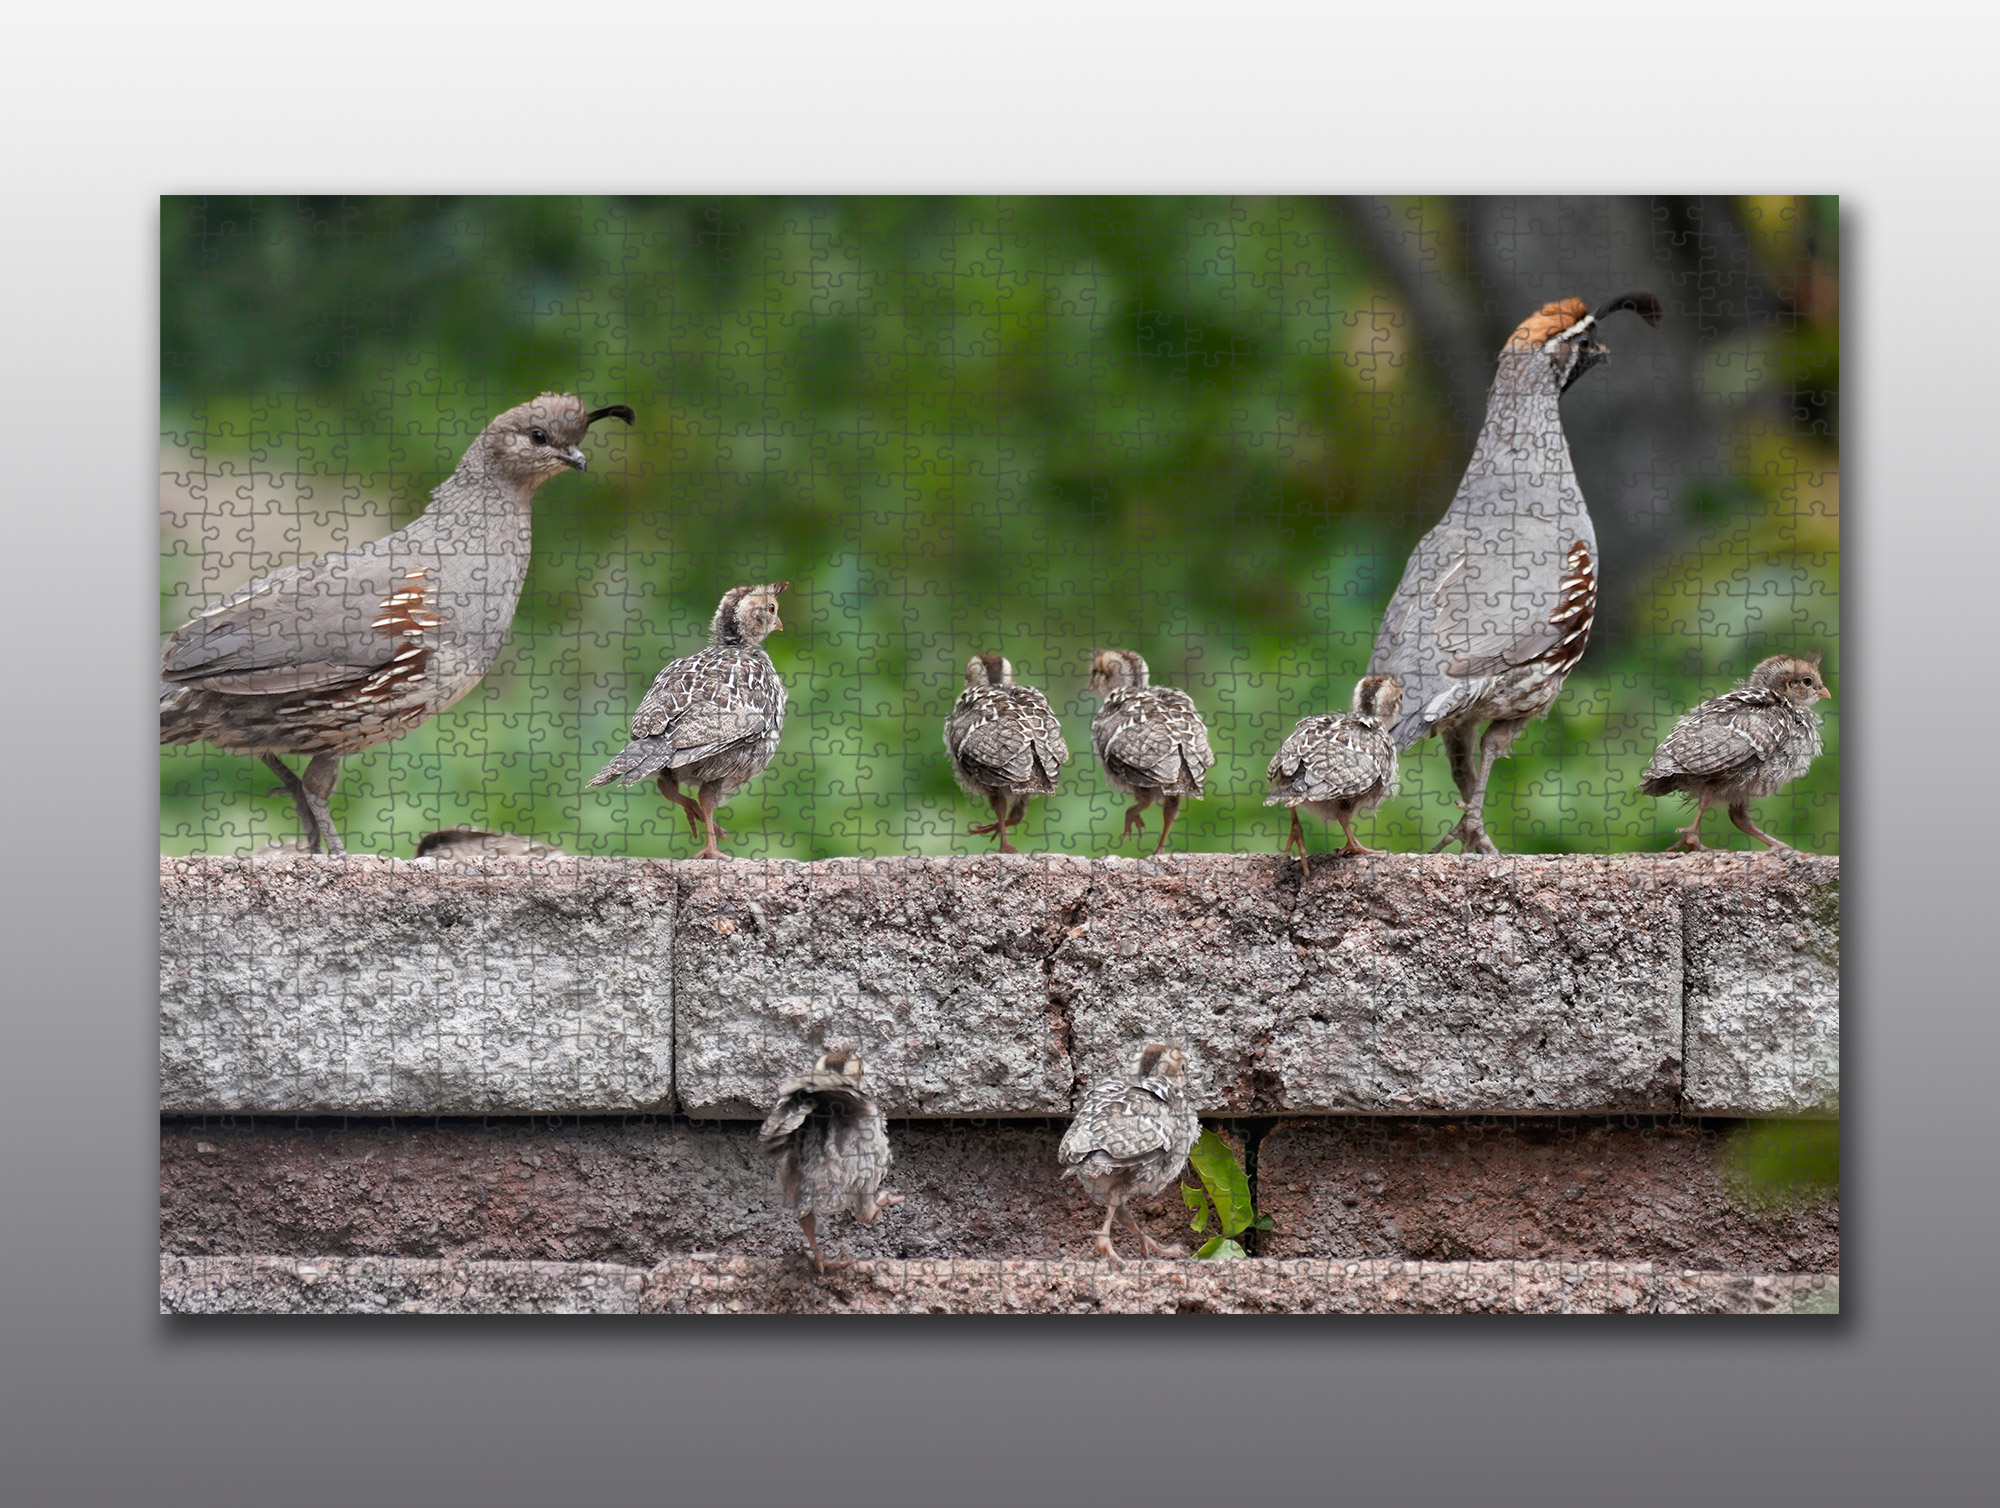 gambels quail family - Moment of Perception Photography